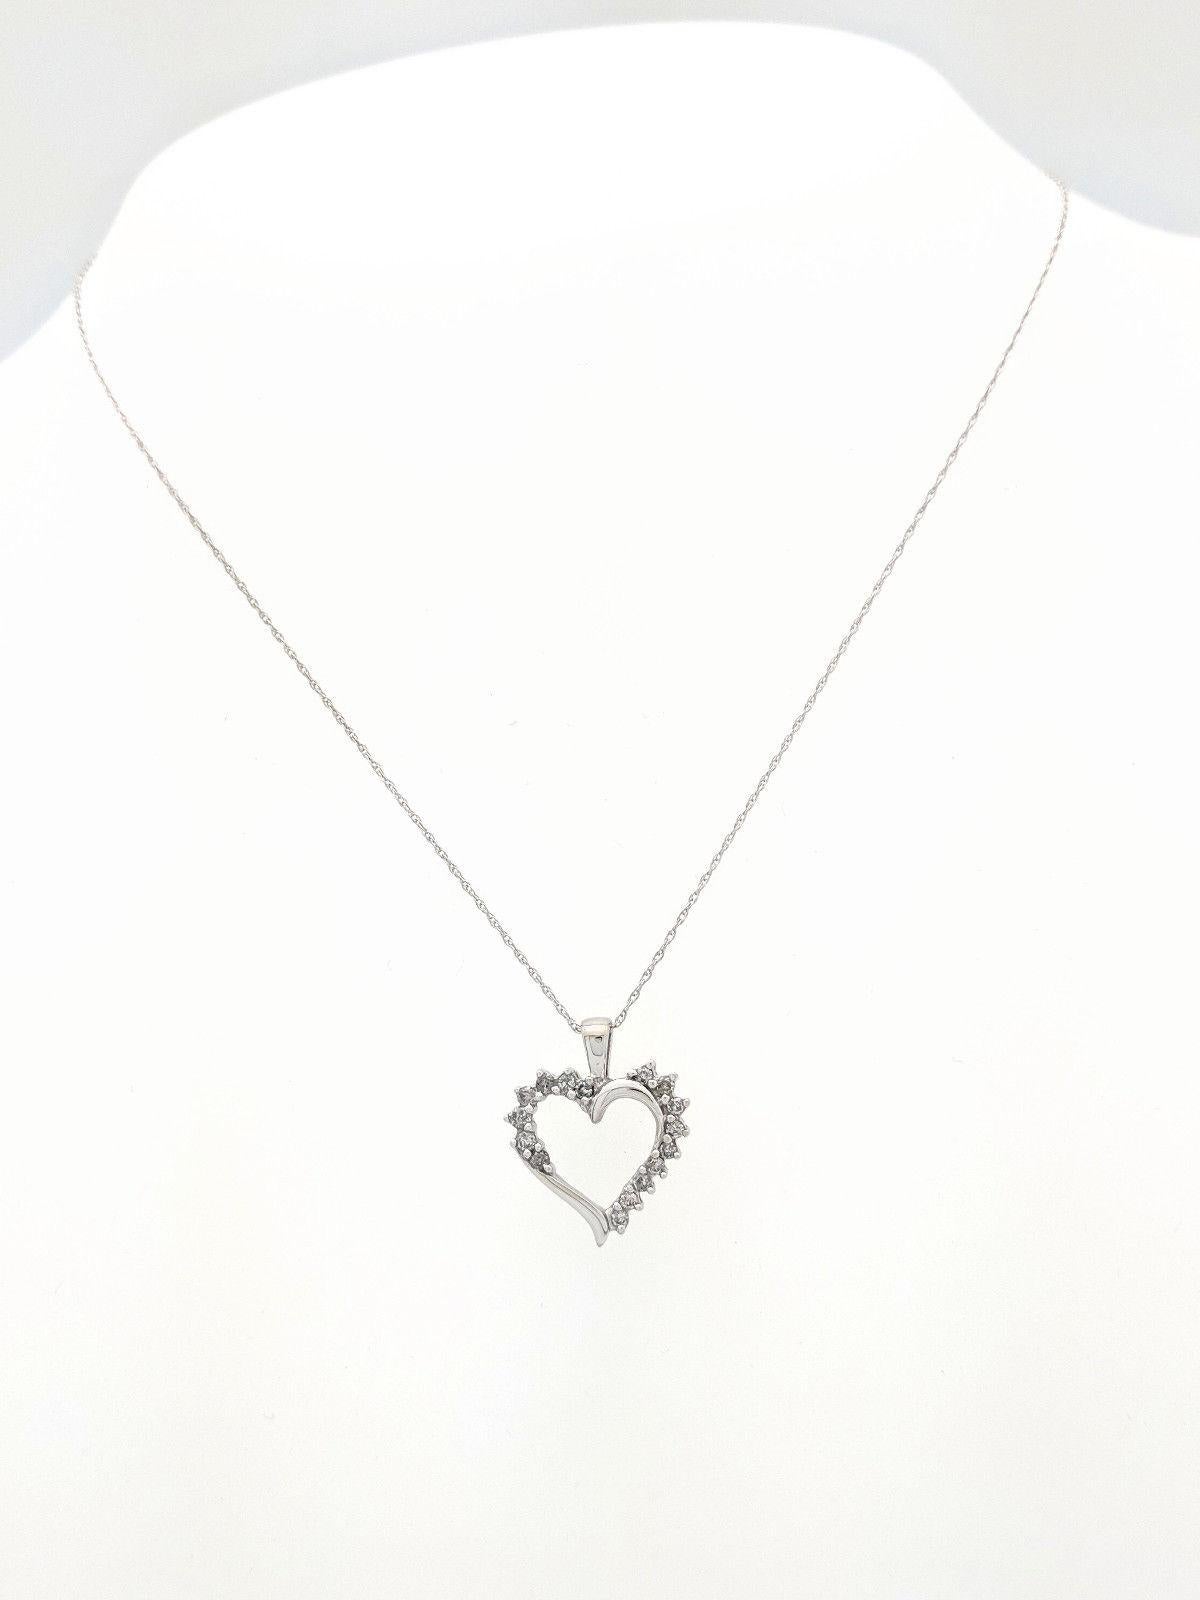 10K White Gold Diamond Heart Pendant Necklace

HJL:2018.526

You are viewing a Beautiful Diamond Heart Pendant Necklace. The piece is crafted from 10k white gold and weighs 1 gram. It features (16) .01ct round brilliant cut diamonds for an estimated